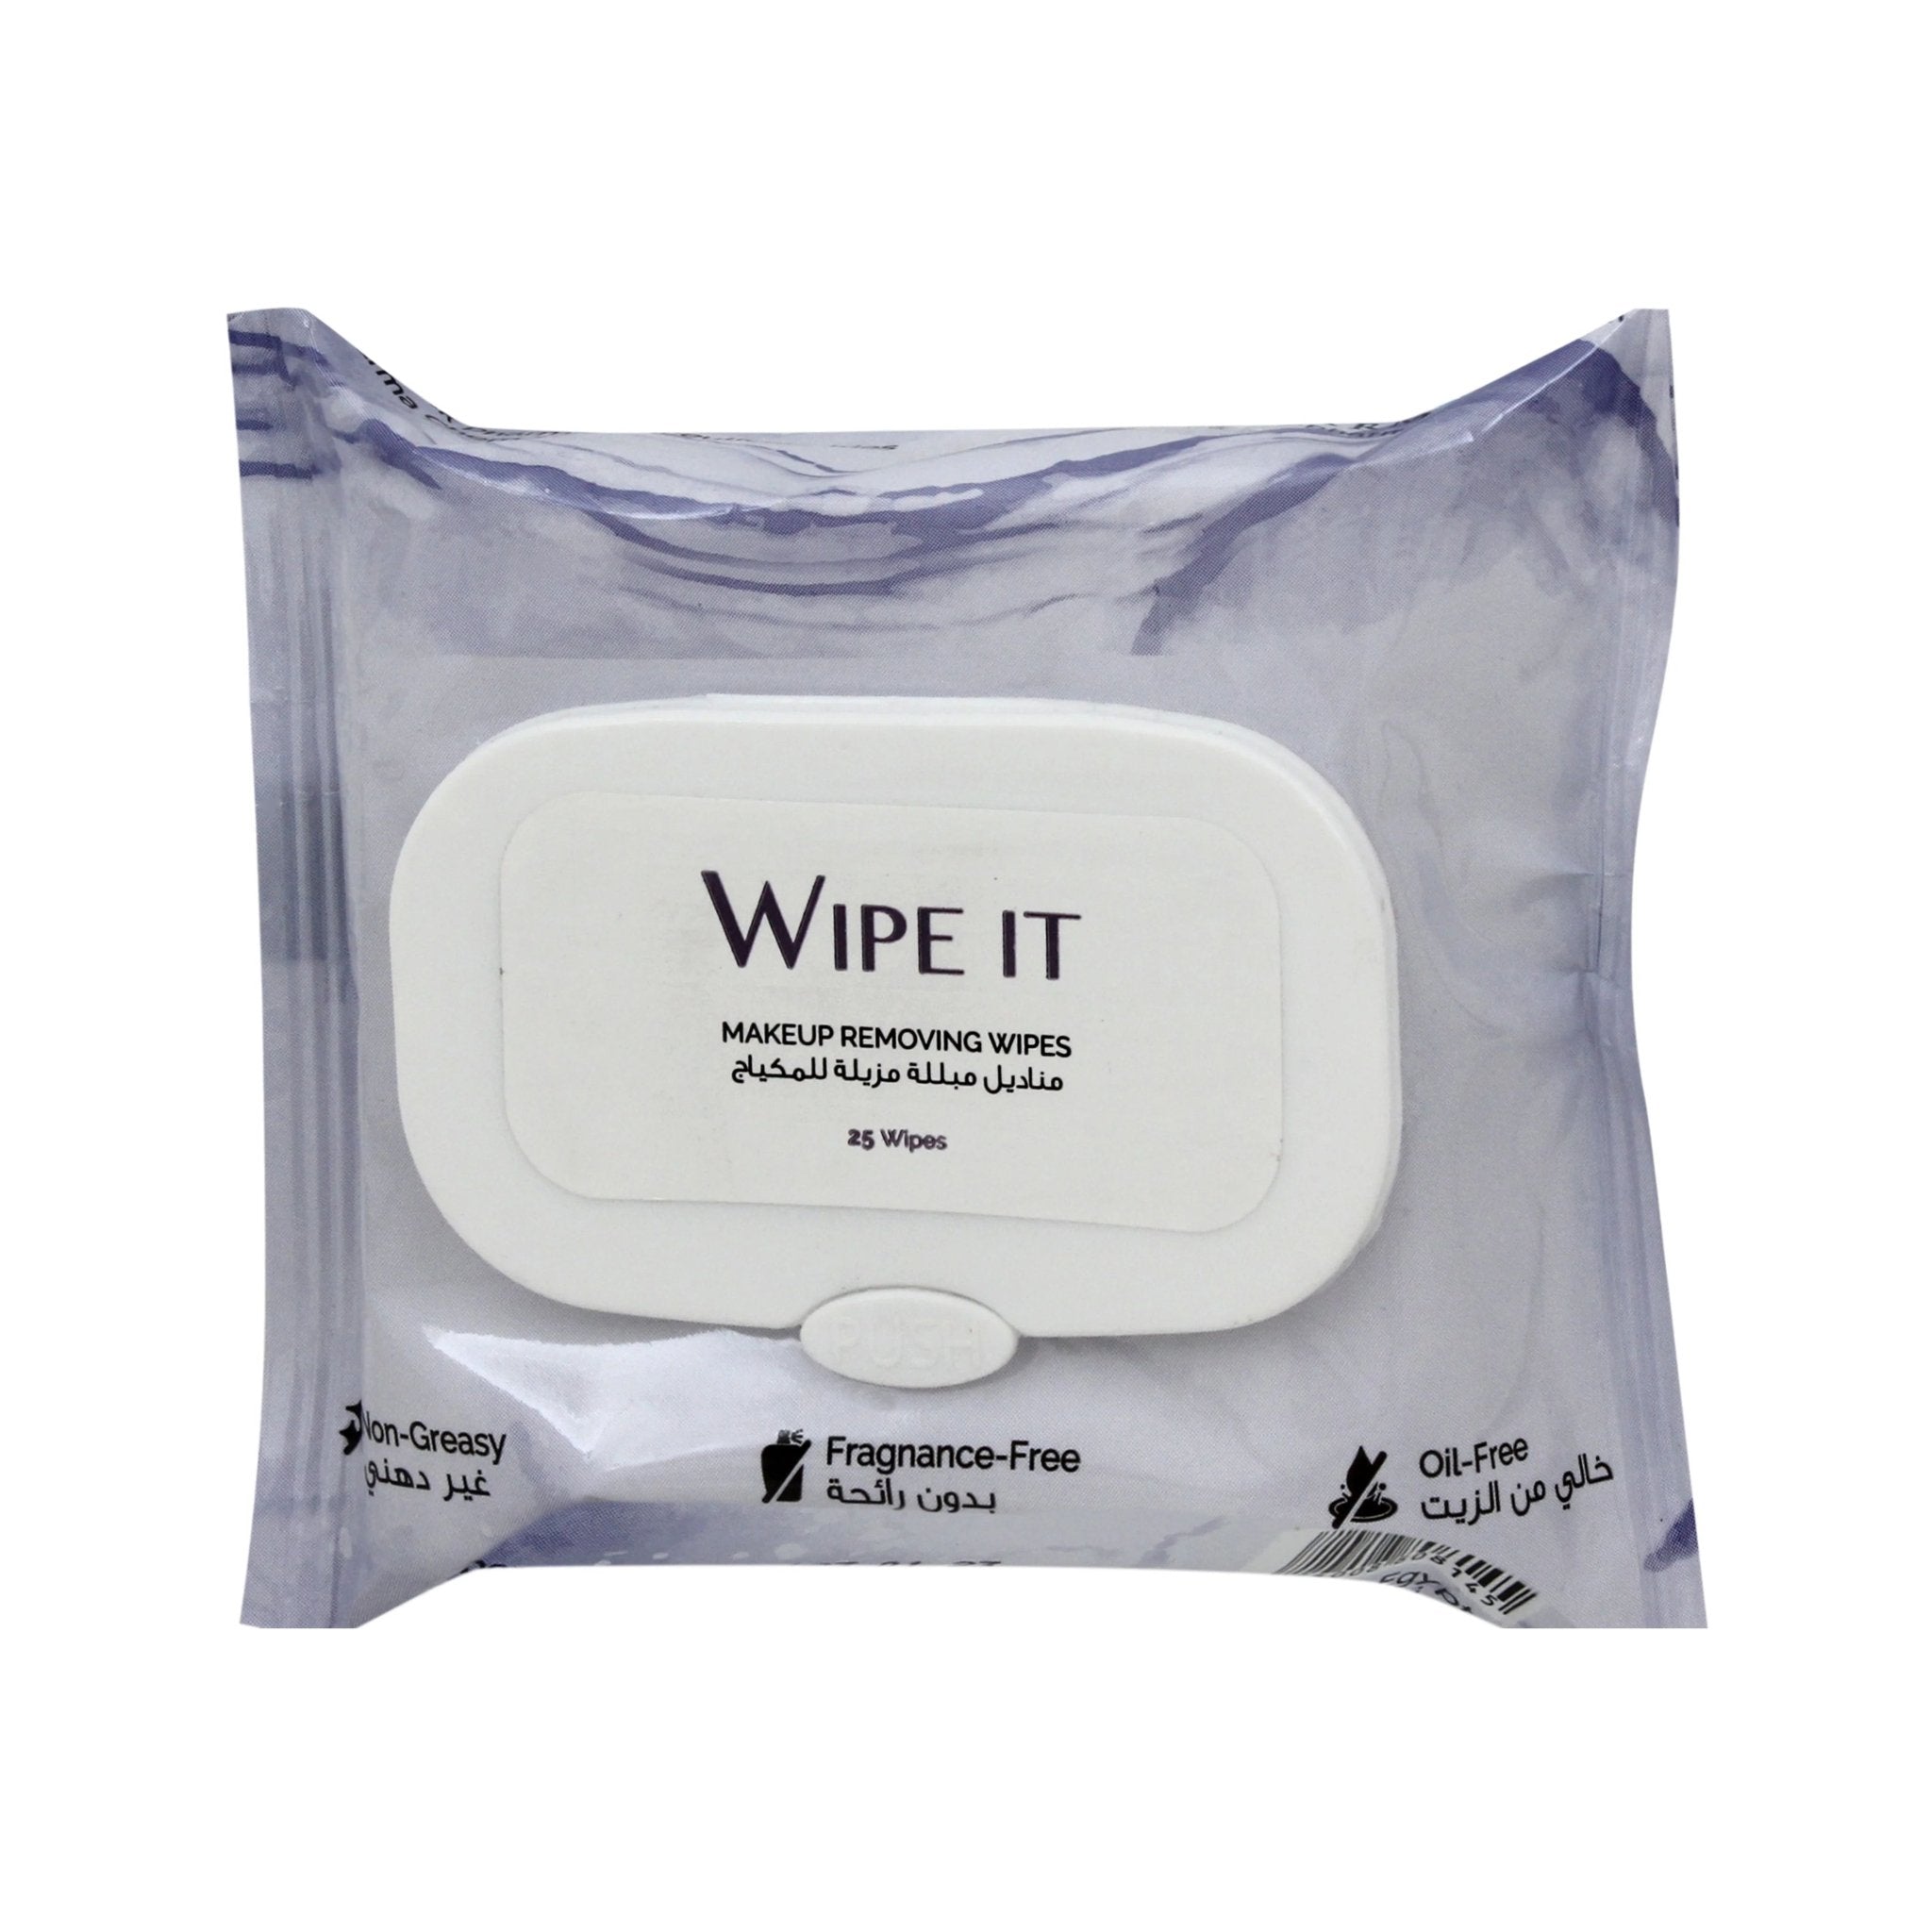 Wipe It Makeup Removing Wipes – 25 Wipes - Bloom Pharmacy